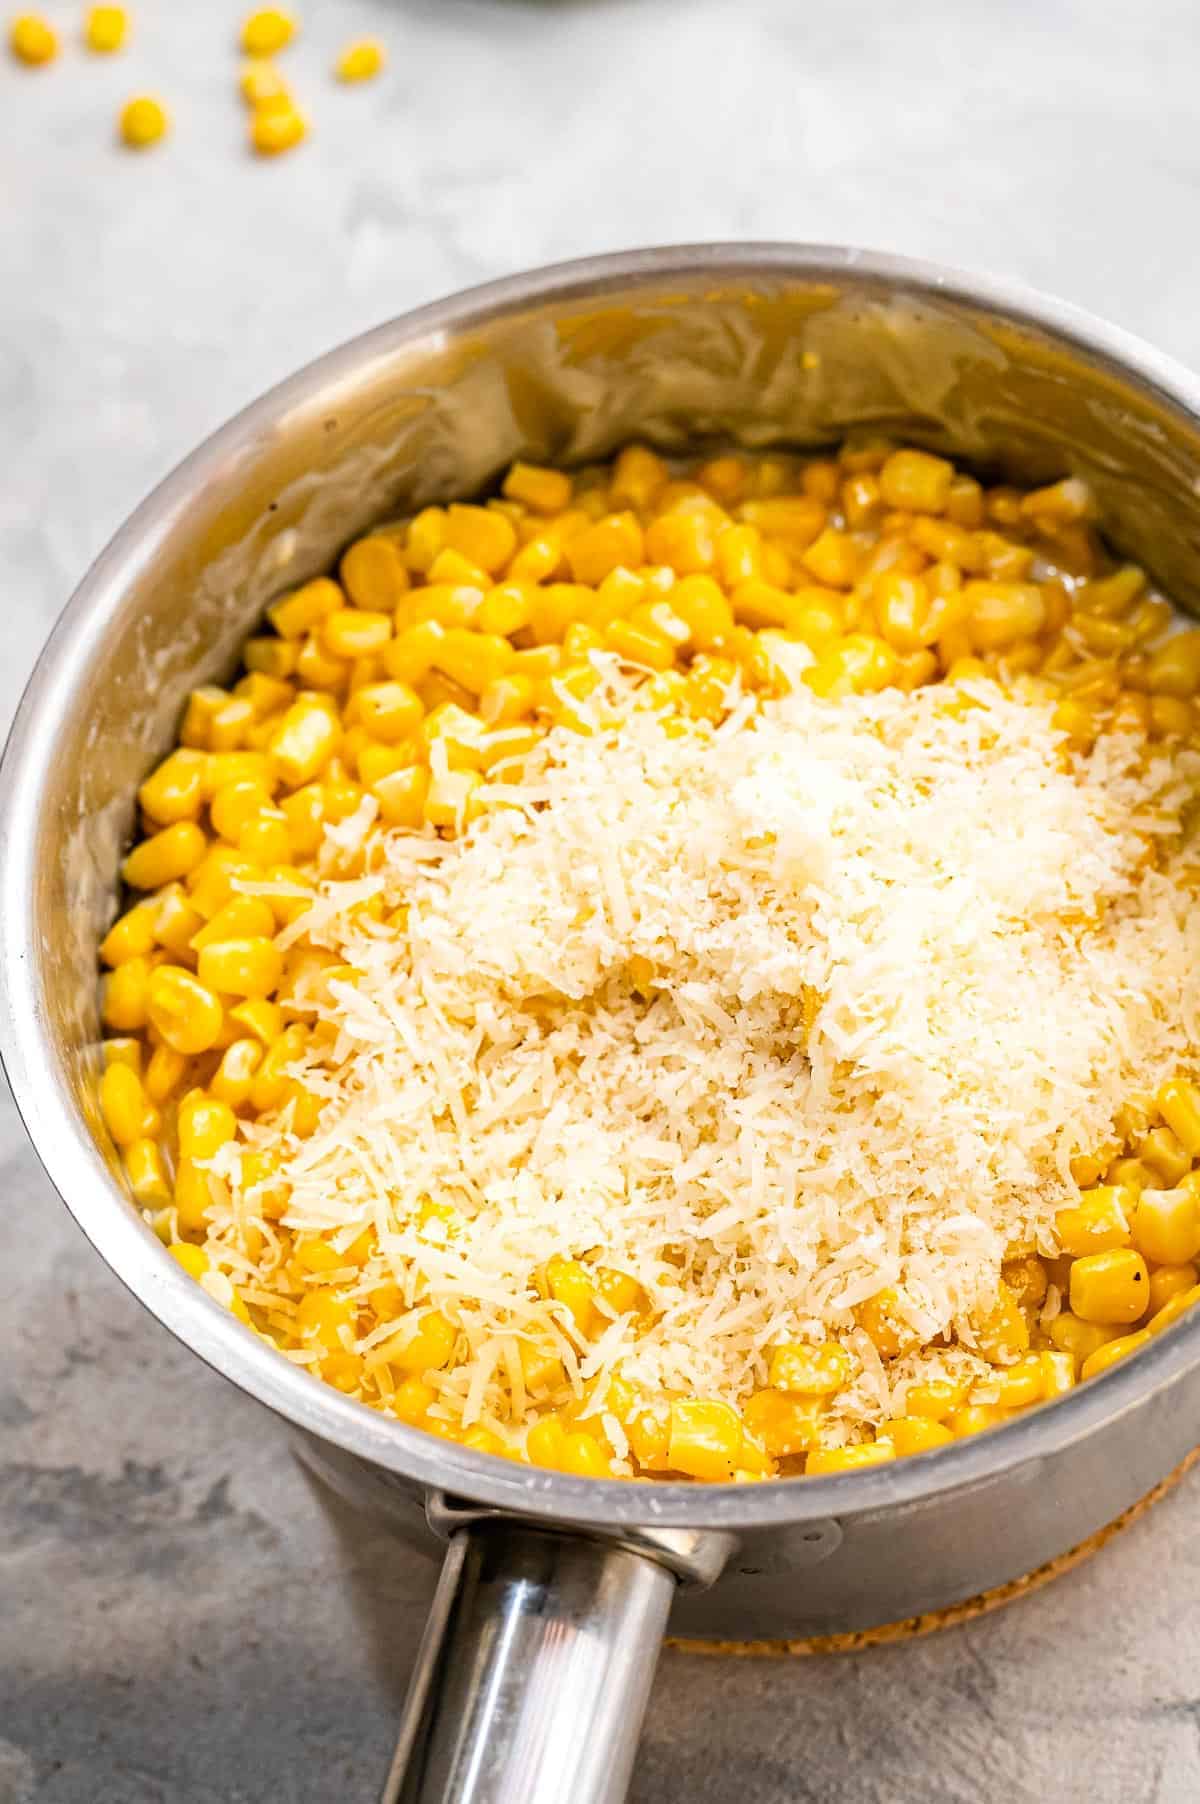 Corn with Parmesan on it in a saucepan